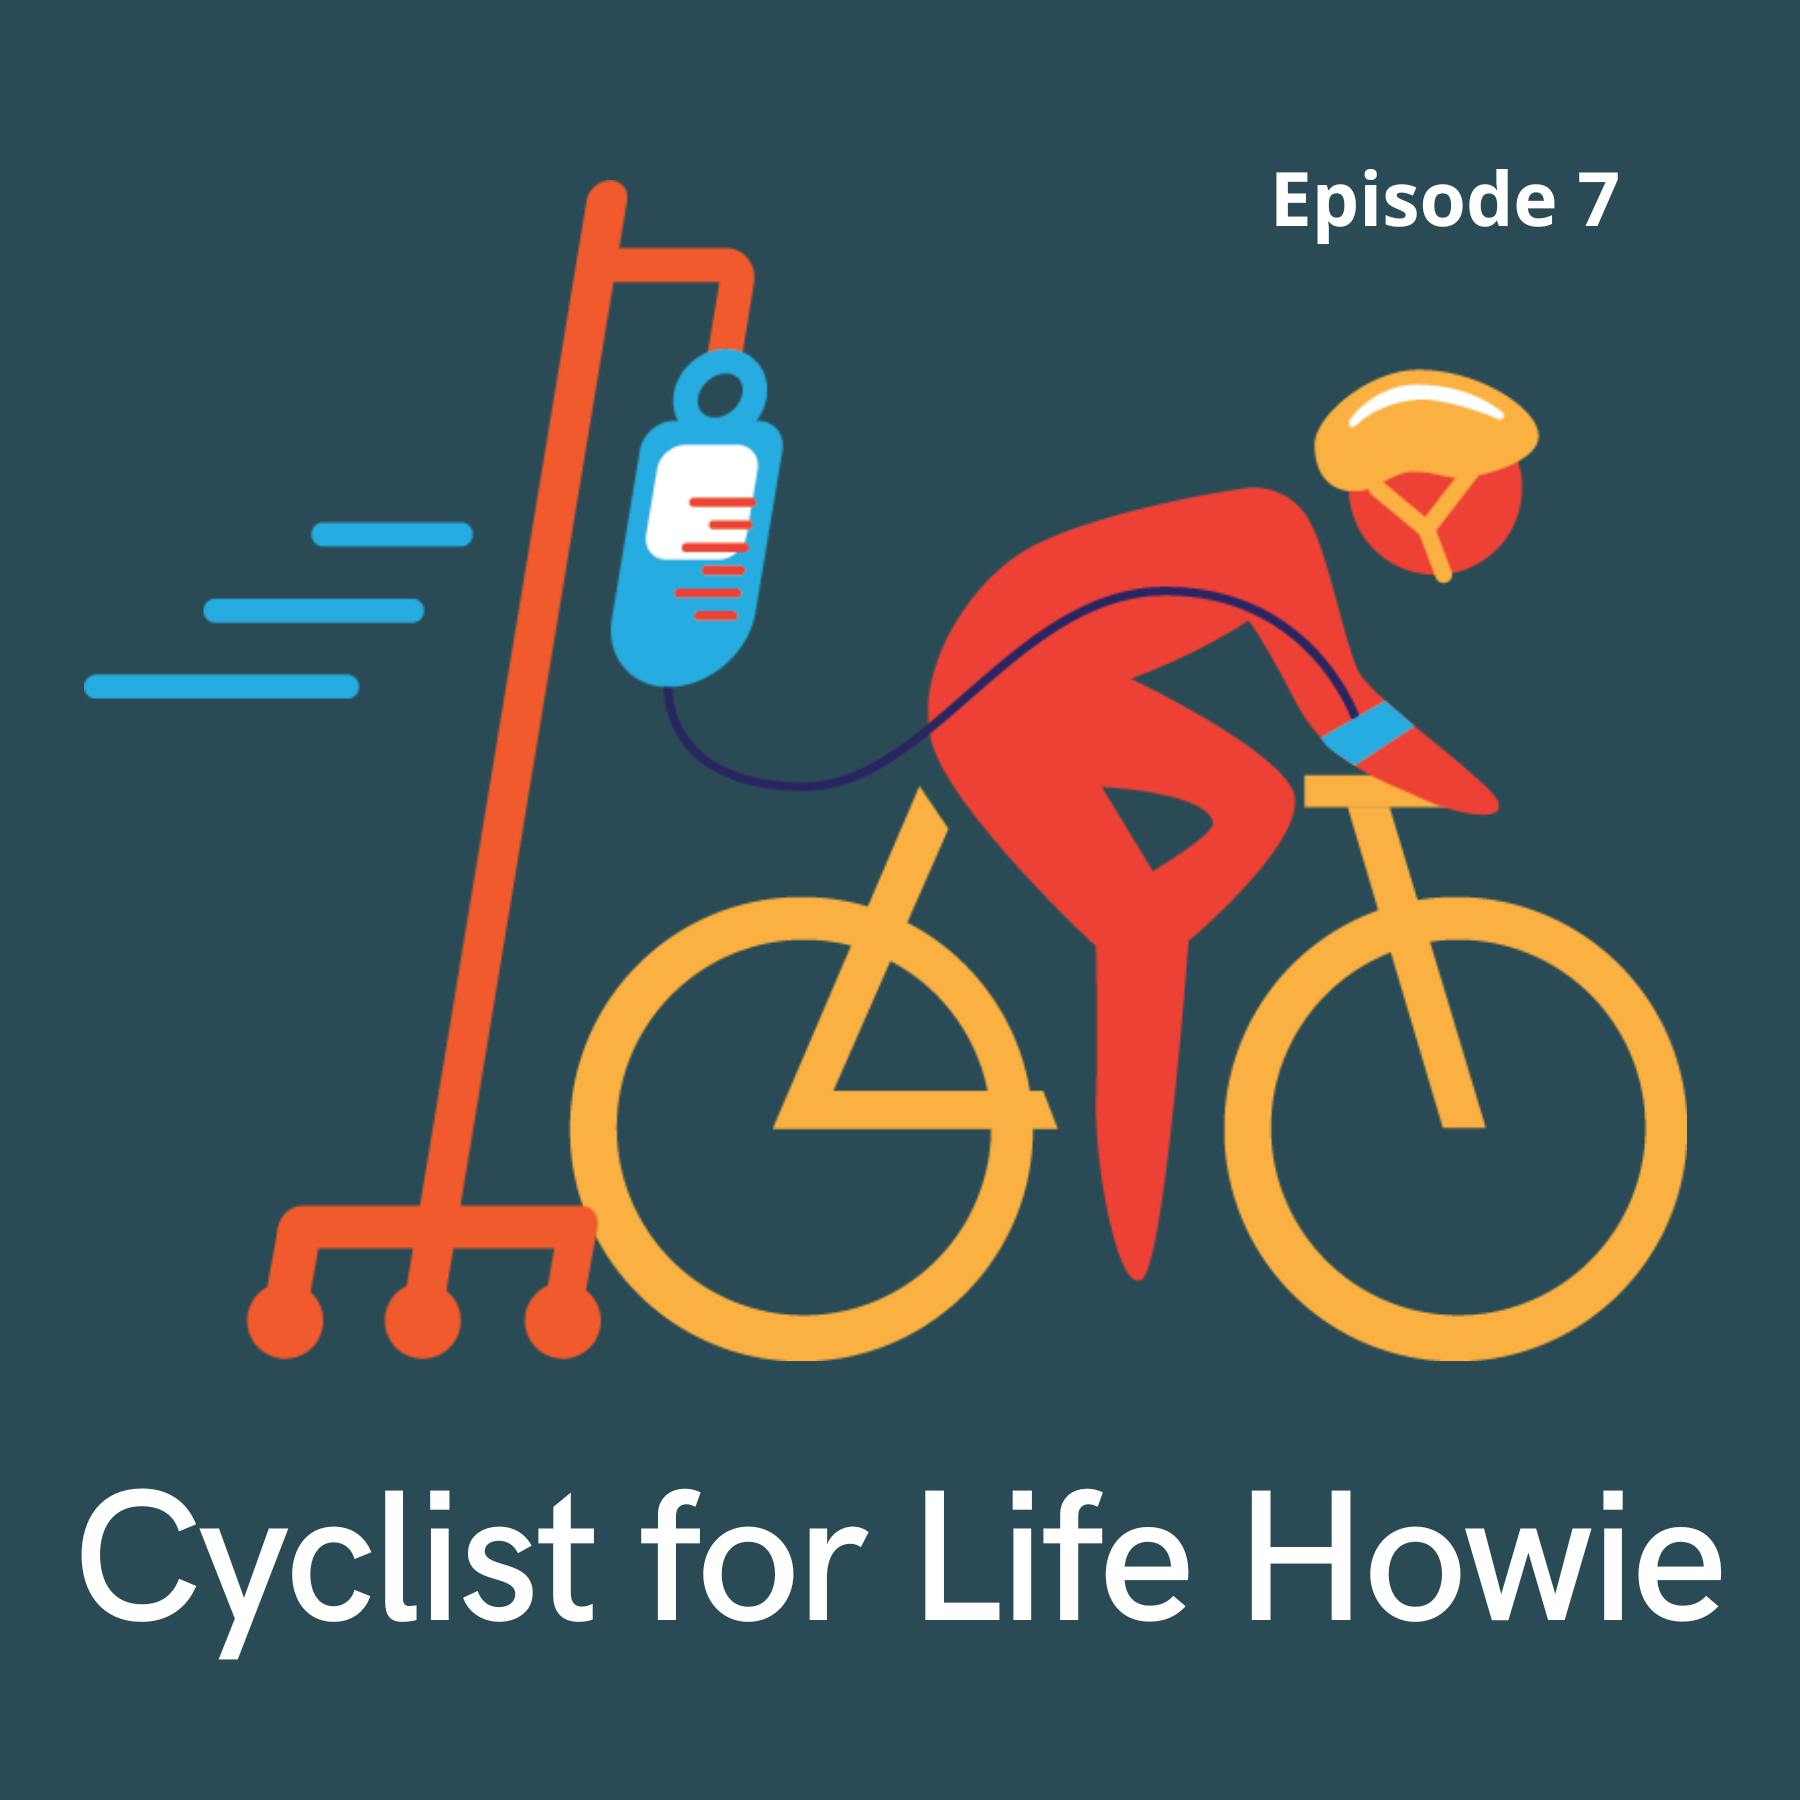 Cyclist for Life Howie: Riding the Ups & Downs of Cancer